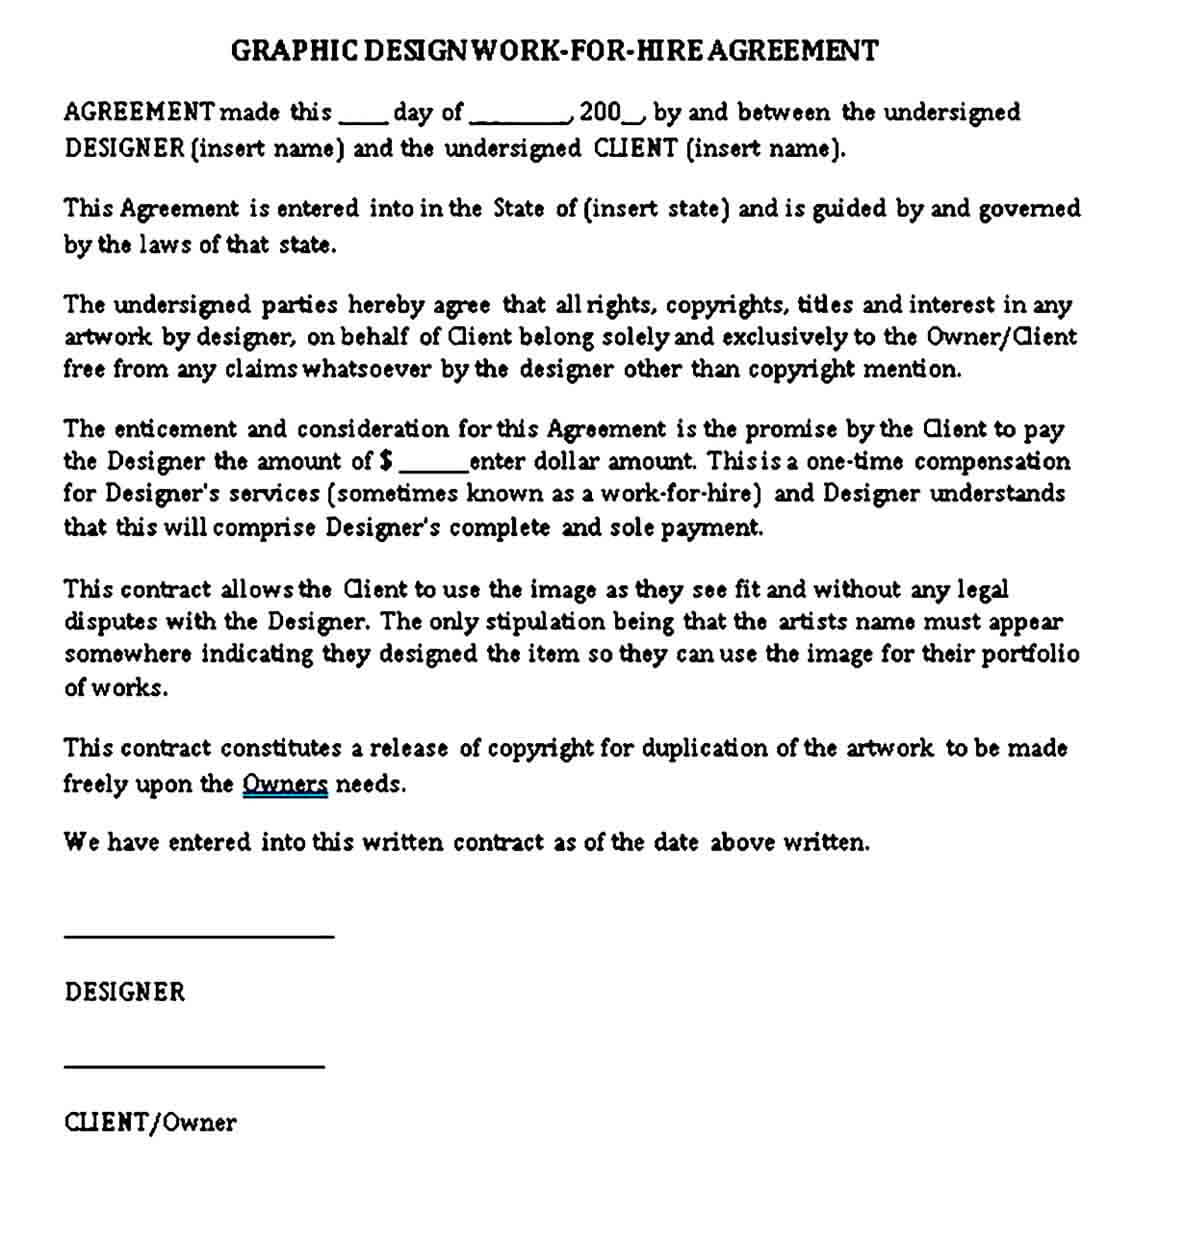 Graphic Design Work for Hire Agreement